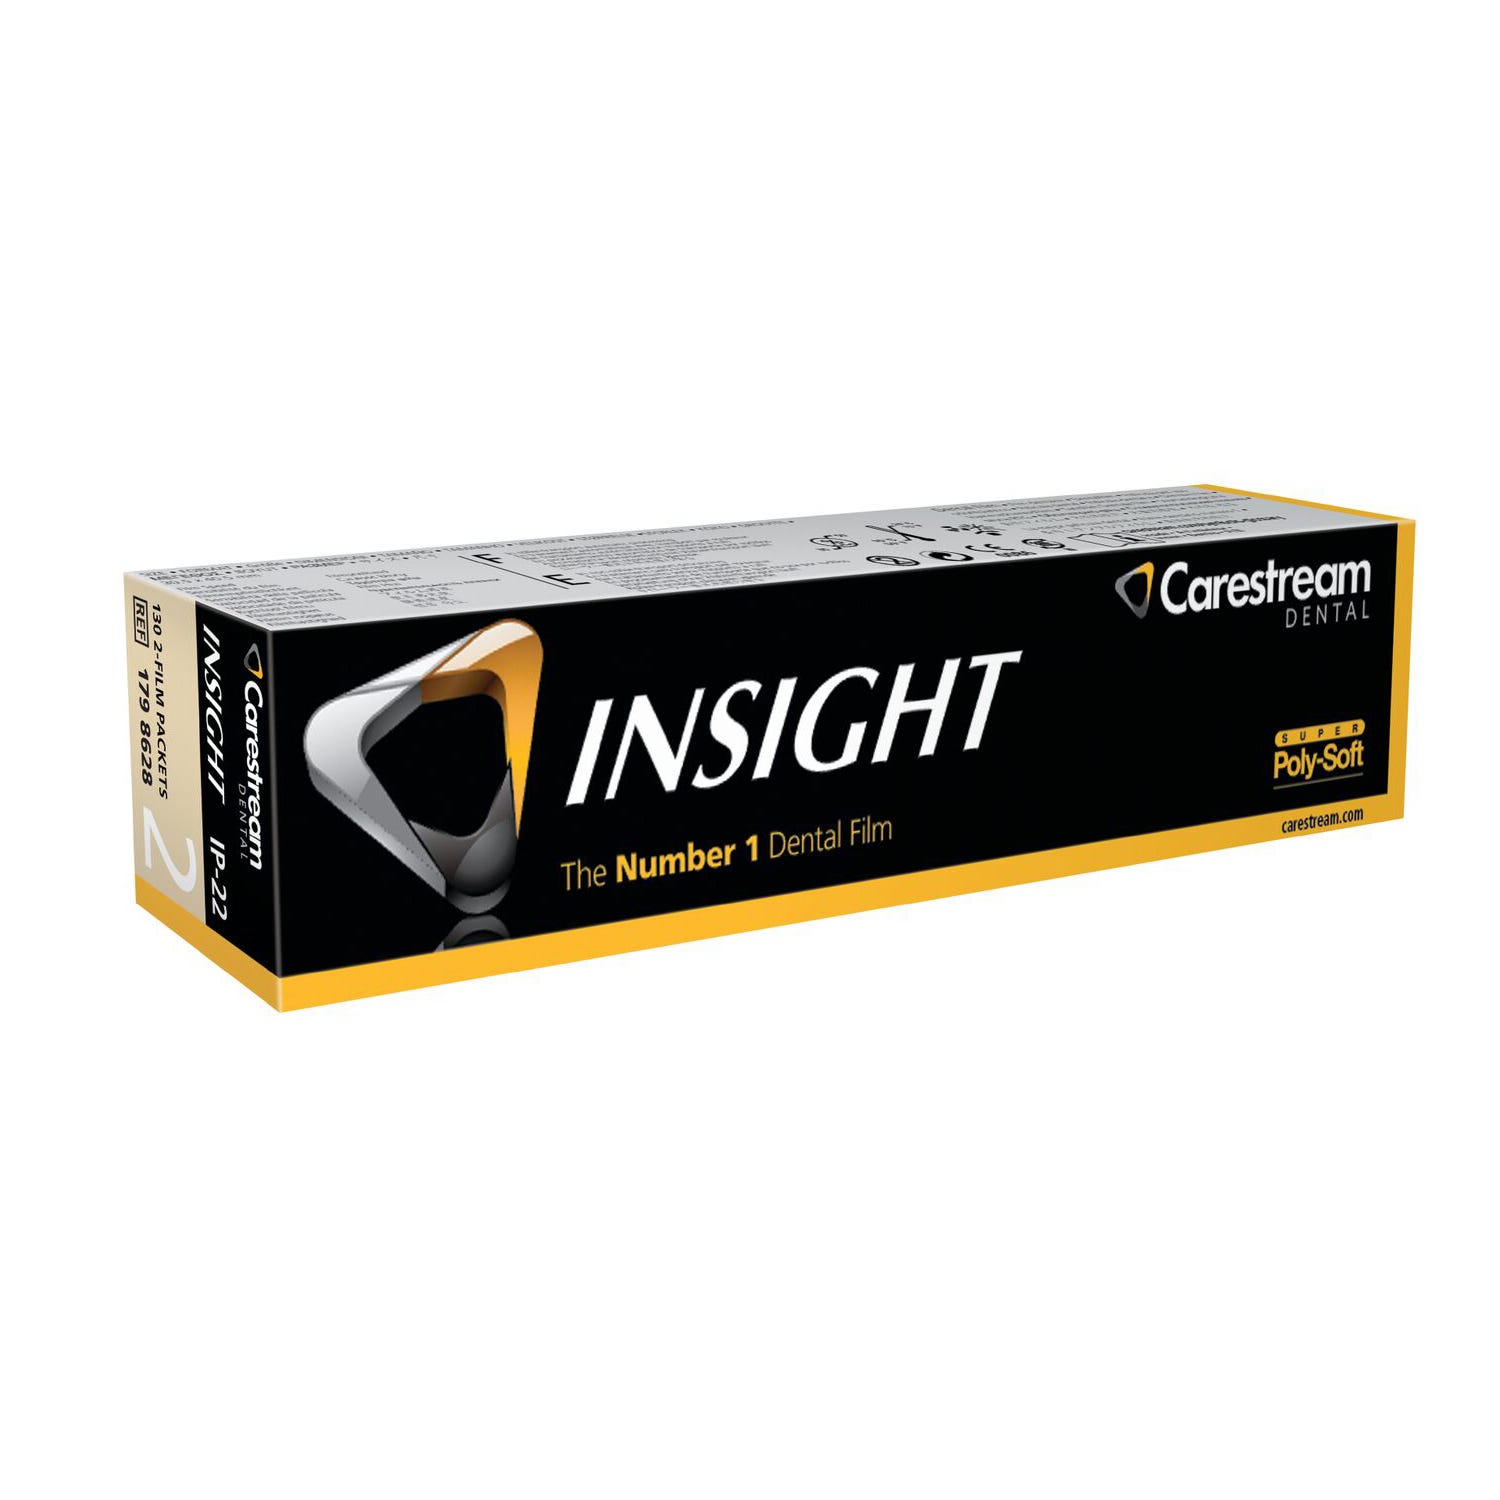 INSIGHT™ Dental Film, Size 2, IP-22, Super Poly-Soft™ Packets (Double Film) - 130/Box